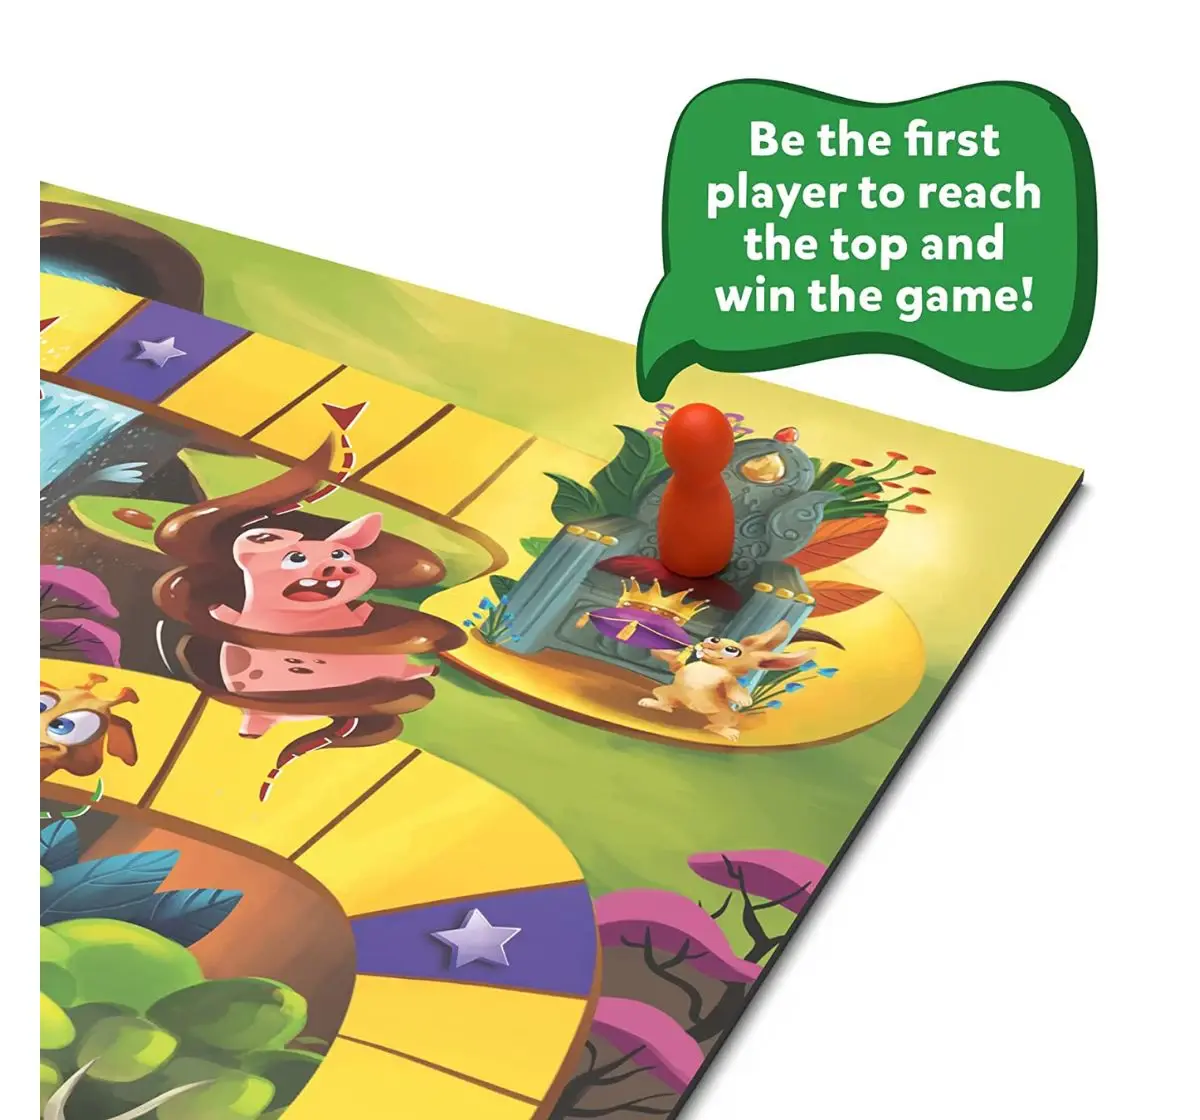 Skillmatics Board Game - Leaps & Tumbles, Race Through The Land of Animal Adventures, Classic Game with a Twist for Ages 3 to 7, Multicolour